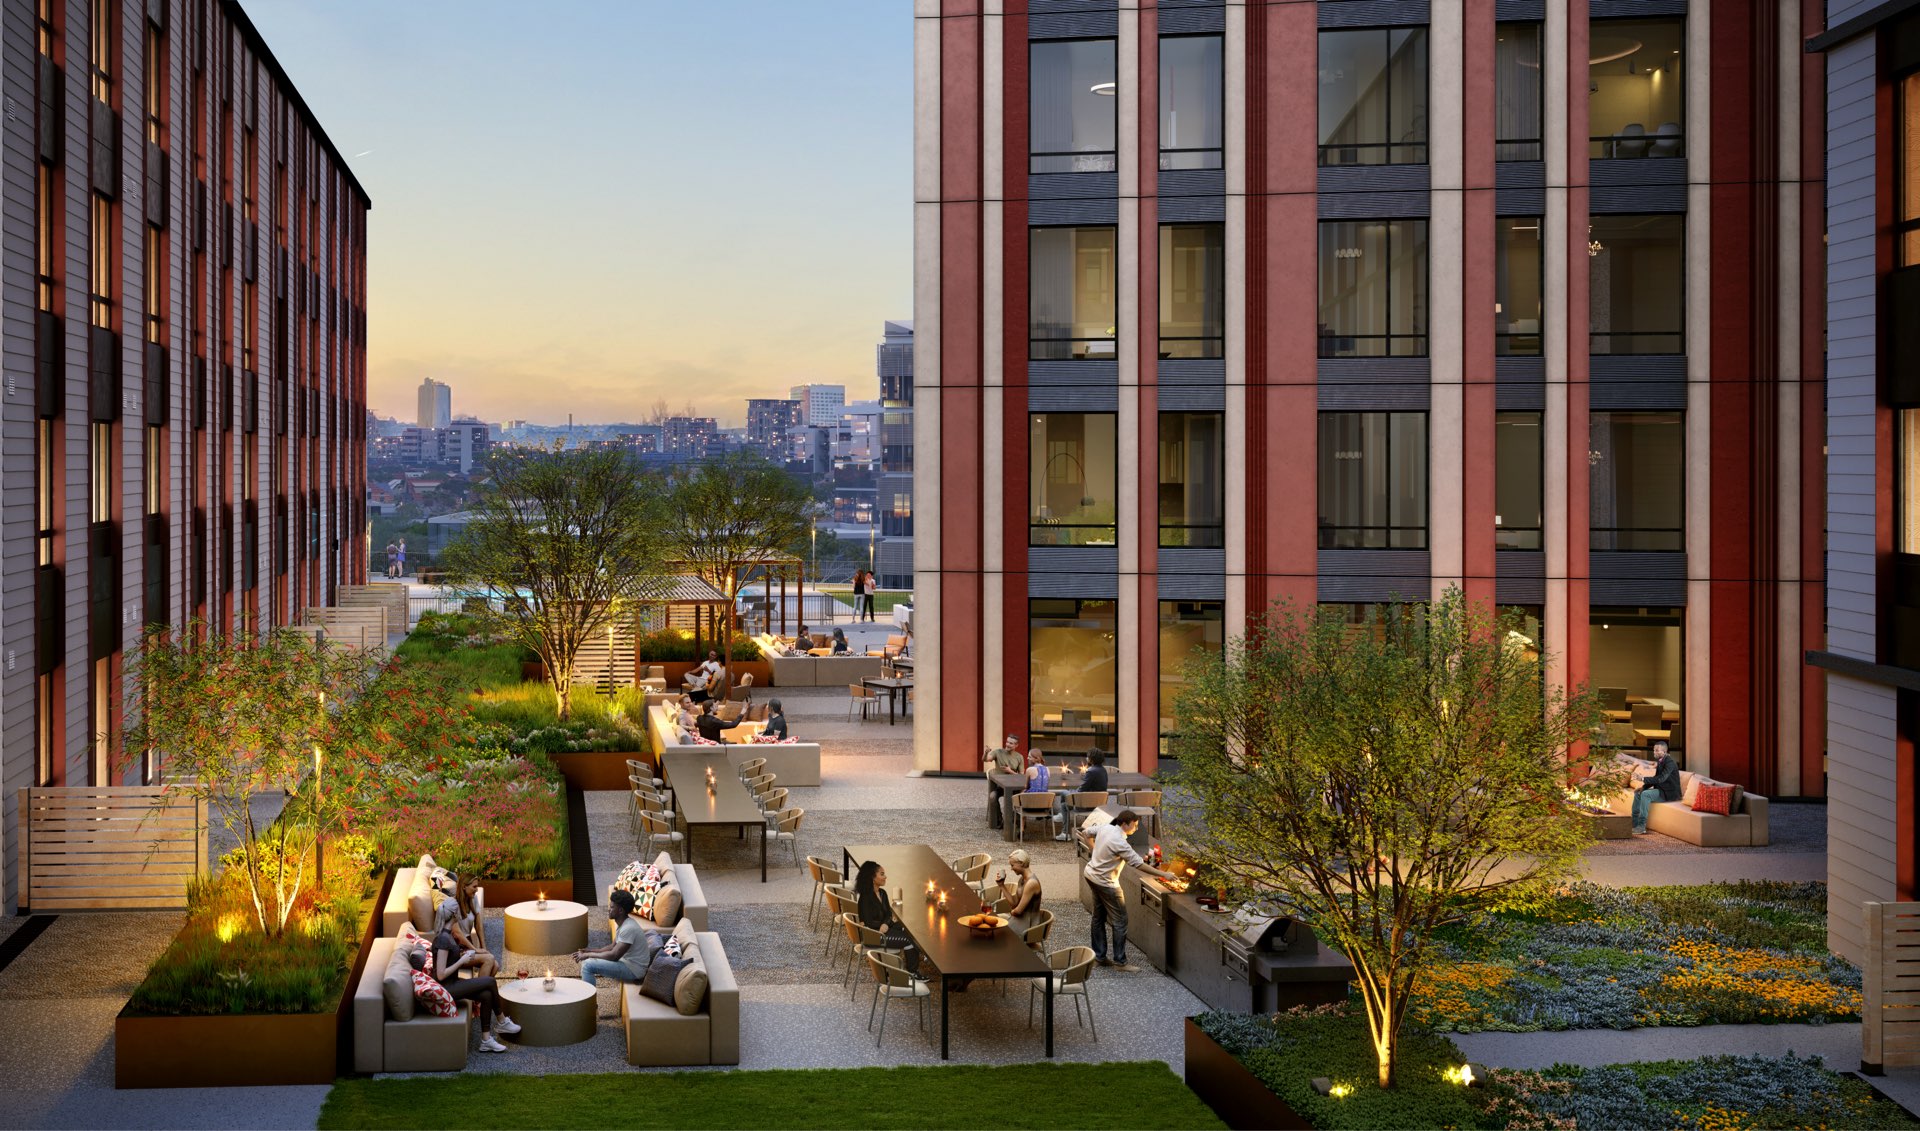 Our outdoor courtyard offers stunning views of the skyline.